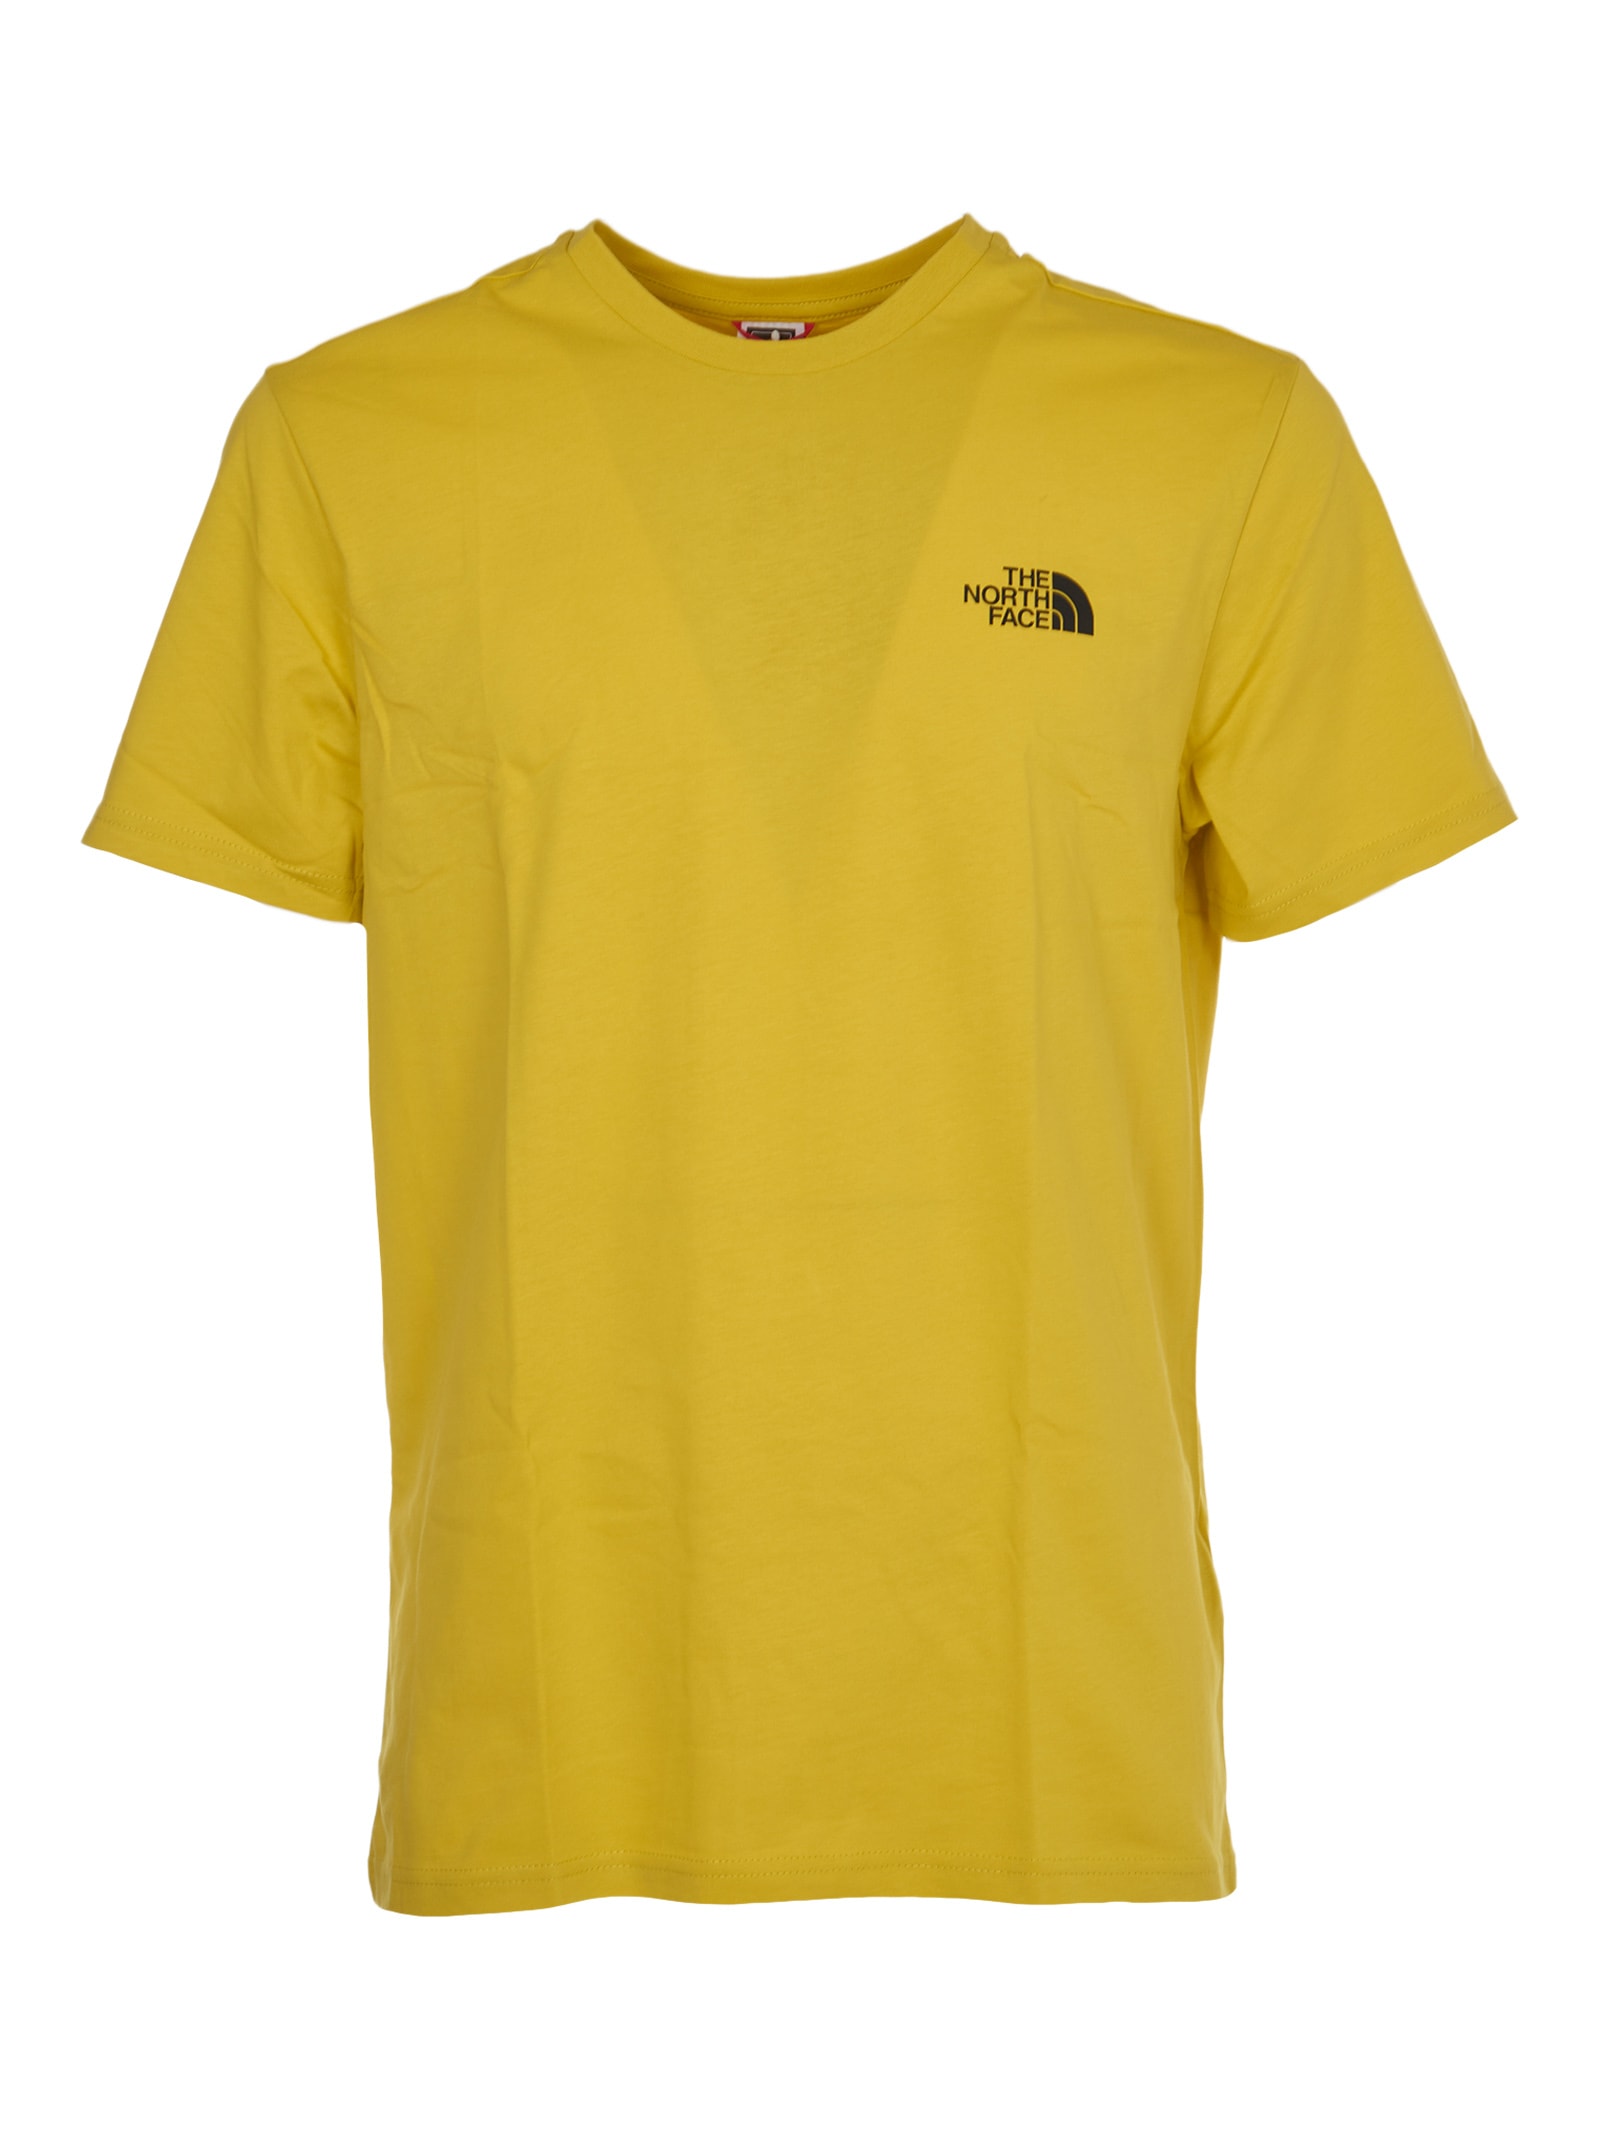 The North Face Yellow T-shirt